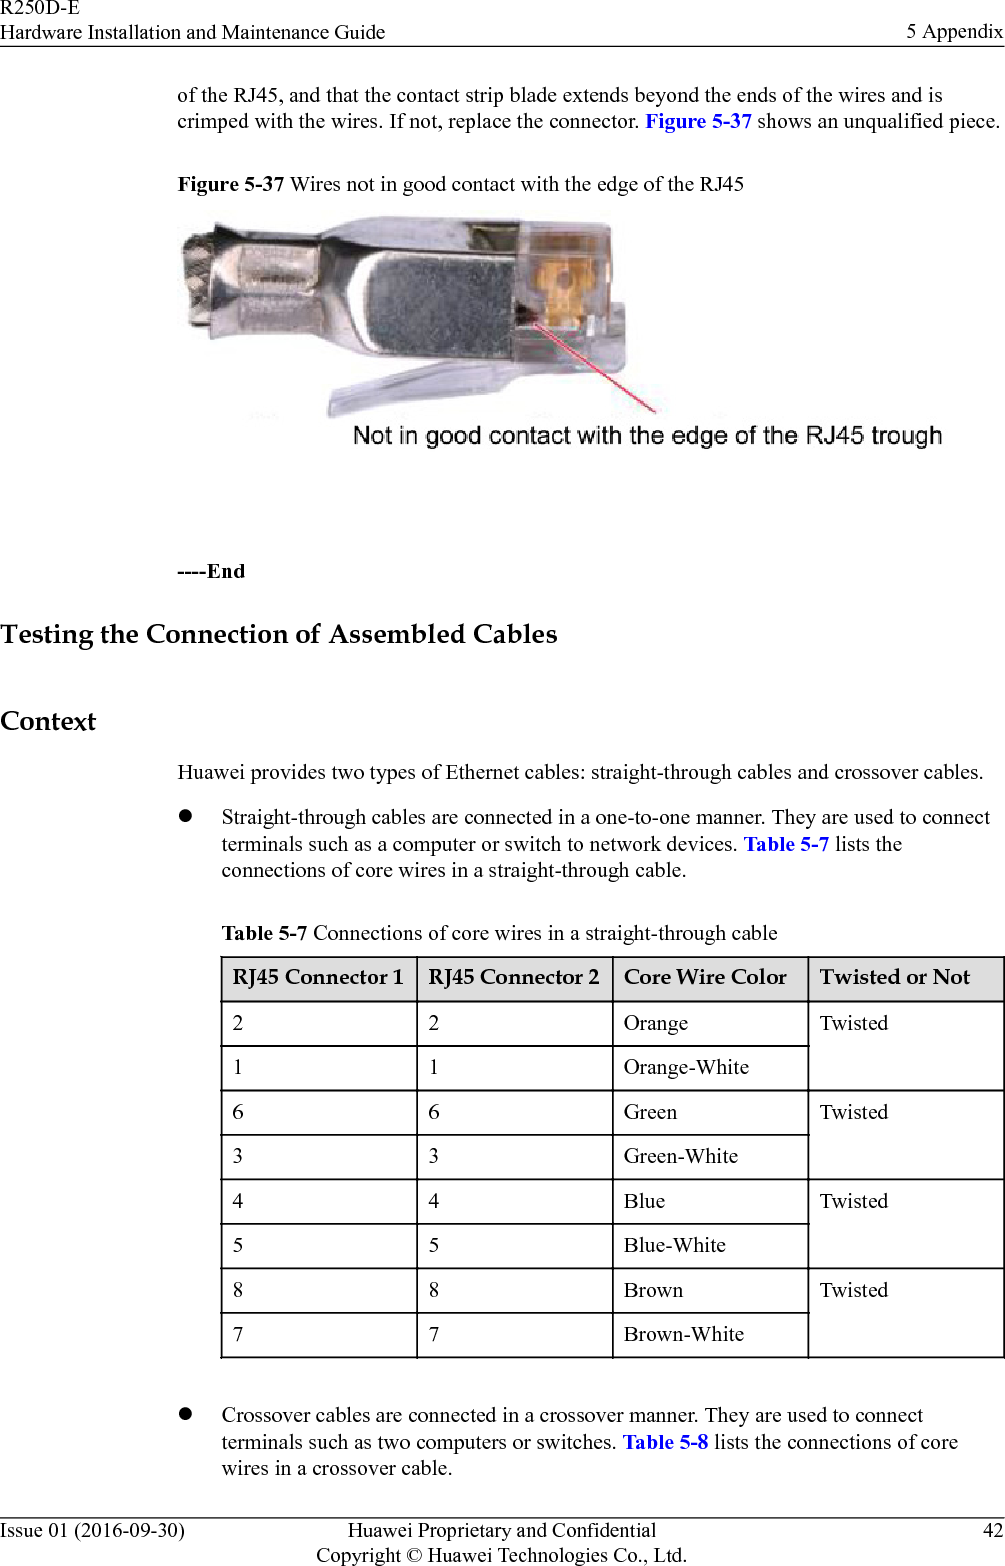 of the RJ45, and that the contact strip blade extends beyond the ends of the wires and iscrimped with the wires. If not, replace the connector. Figure 5-37 shows an unqualified piece.Figure 5-37 Wires not in good contact with the edge of the RJ45 ----EndTesting the Connection of Assembled CablesContextHuawei provides two types of Ethernet cables: straight-through cables and crossover cables.lStraight-through cables are connected in a one-to-one manner. They are used to connectterminals such as a computer or switch to network devices. Table 5-7 lists theconnections of core wires in a straight-through cable.Table 5-7 Connections of core wires in a straight-through cableRJ45 Connector 1 RJ45 Connector 2 Core Wire Color Twisted or Not2 2 Orange Twisted1 1 Orange-White6 6 Green Twisted3 3 Green-White4 4 Blue Twisted5 5 Blue-White8 8 Brown Twisted7 7 Brown-White lCrossover cables are connected in a crossover manner. They are used to connectterminals such as two computers or switches. Table 5-8 lists the connections of corewires in a crossover cable.R250D-EHardware Installation and Maintenance Guide 5 AppendixIssue 01 (2016-09-30) Huawei Proprietary and ConfidentialCopyright © Huawei Technologies Co., Ltd.42